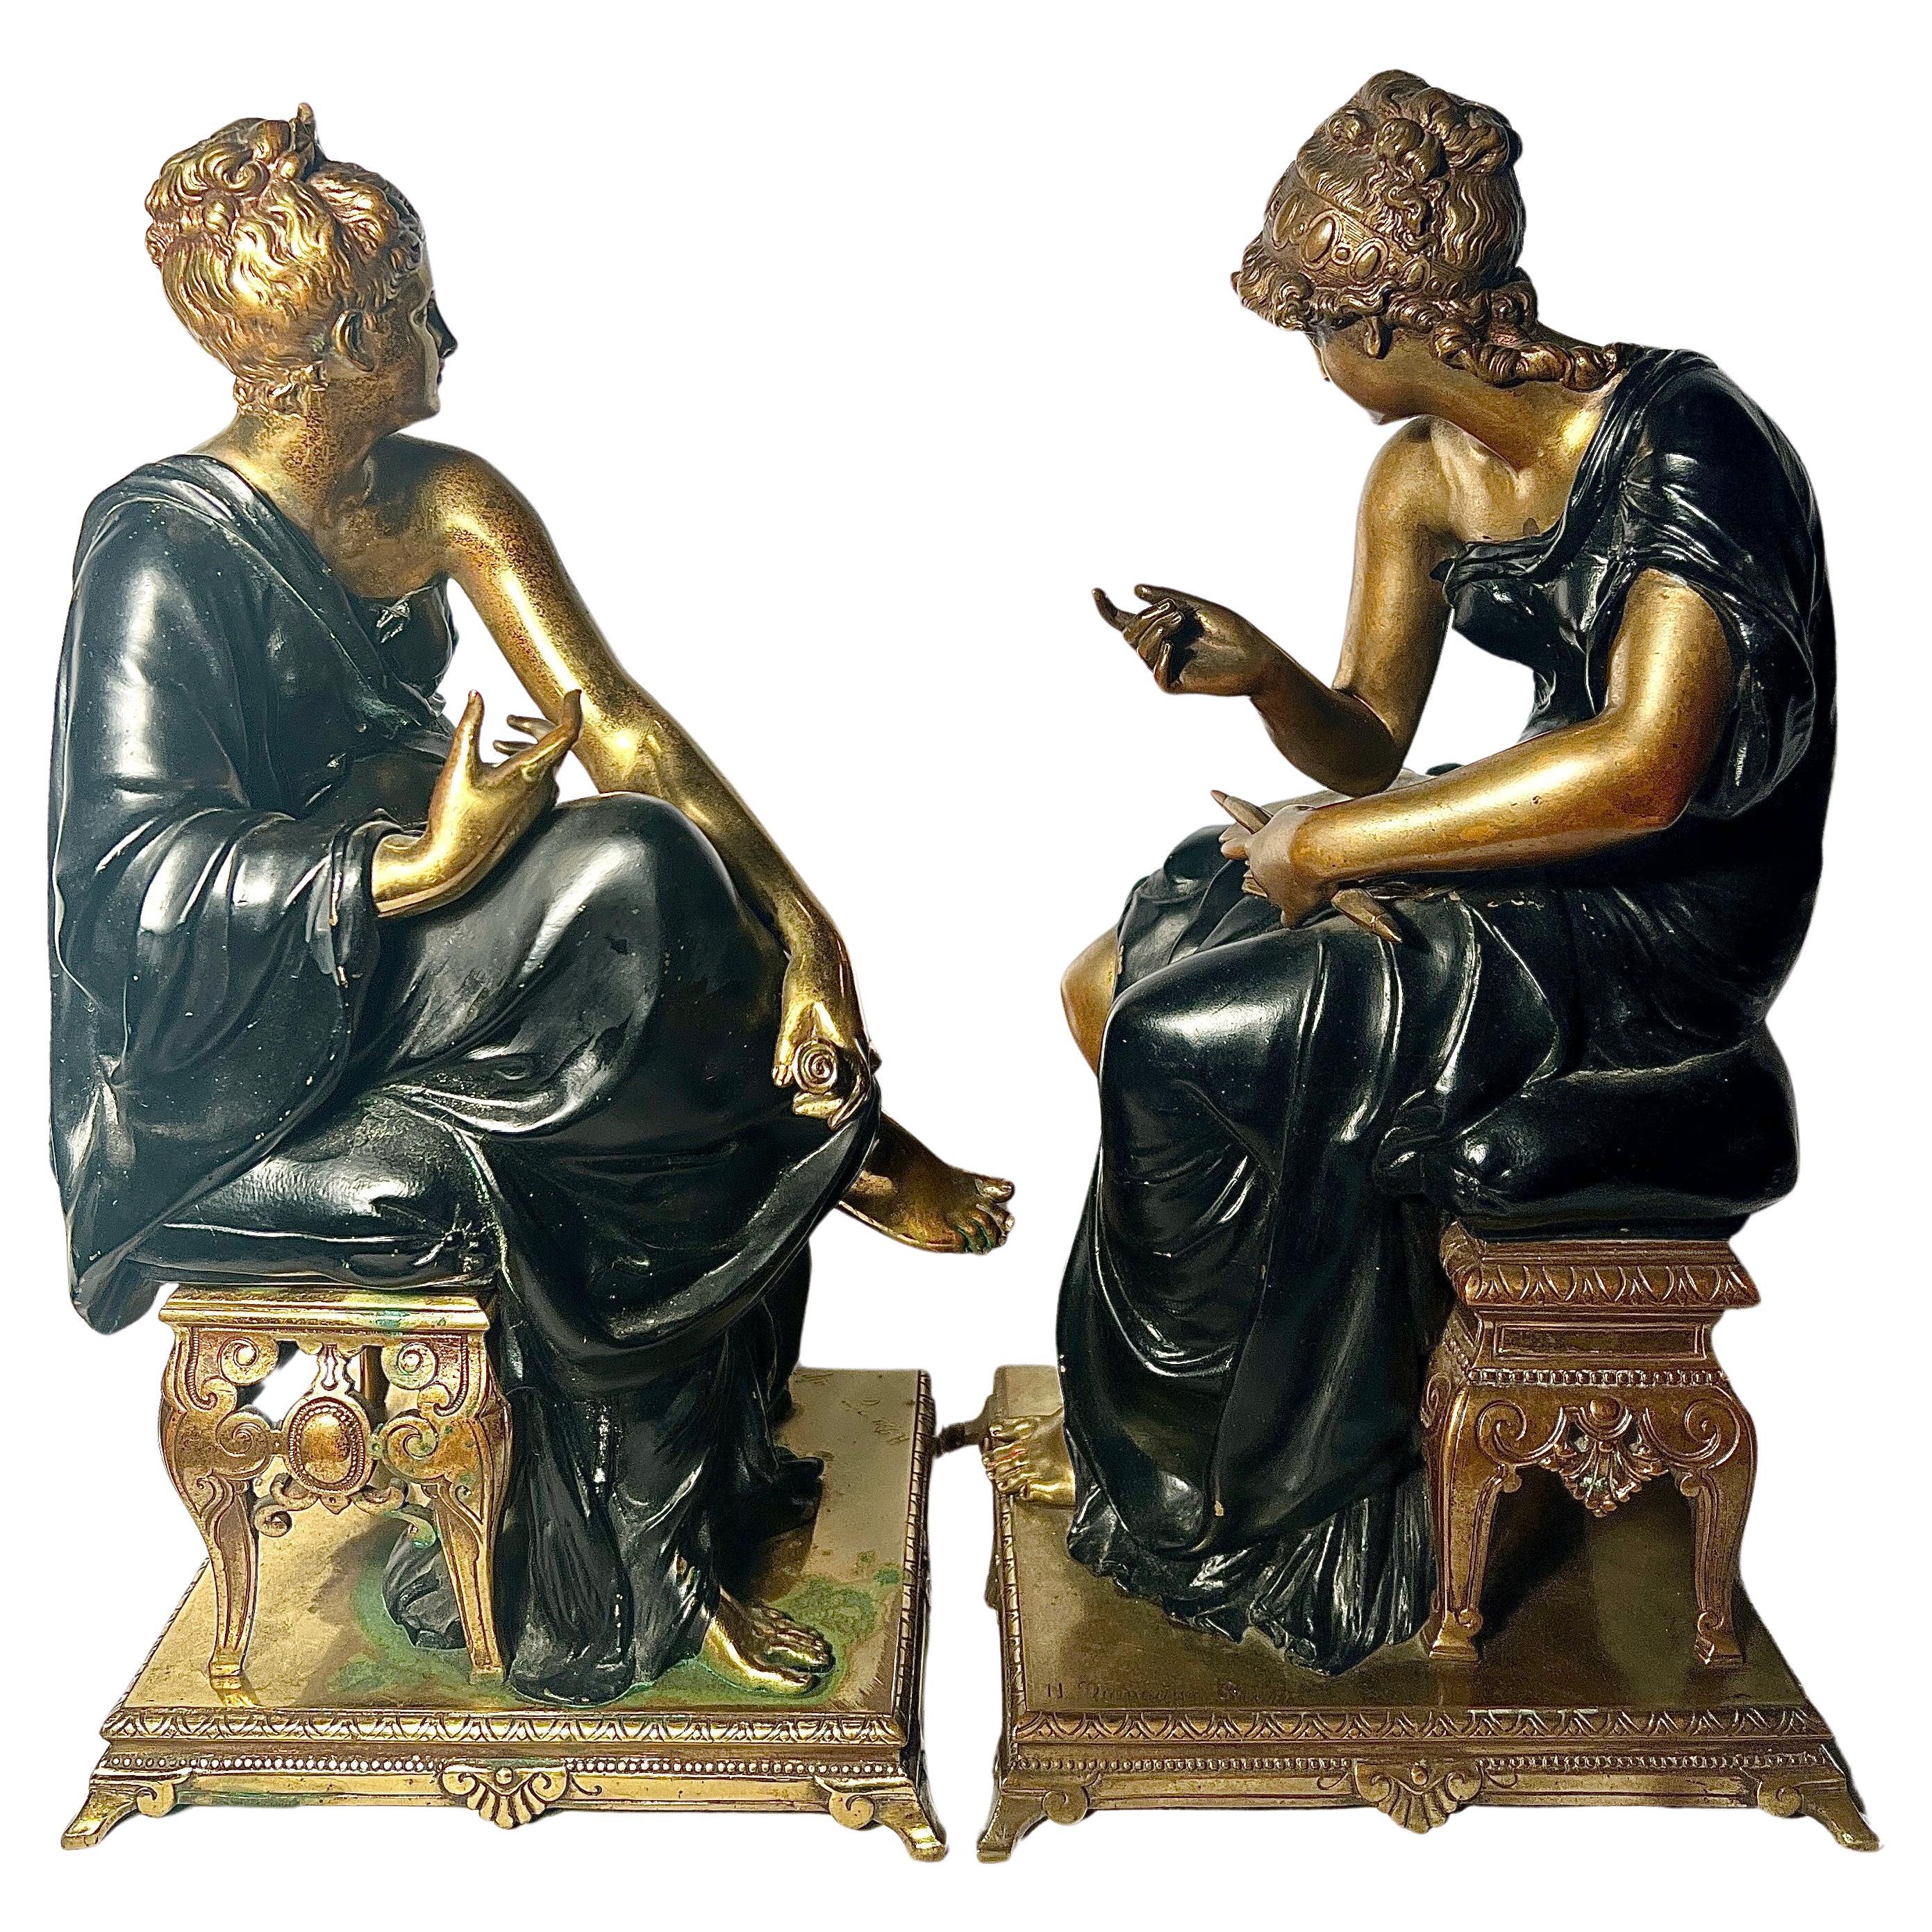 Pair Antique 19th Century French Two Tone Bronze Sculptures of Seated Ladies Signed by Etienne Henri Dumaige (French, 1830-1888).  Sculptures are in both Gold Bronze and Patinated Bronze
